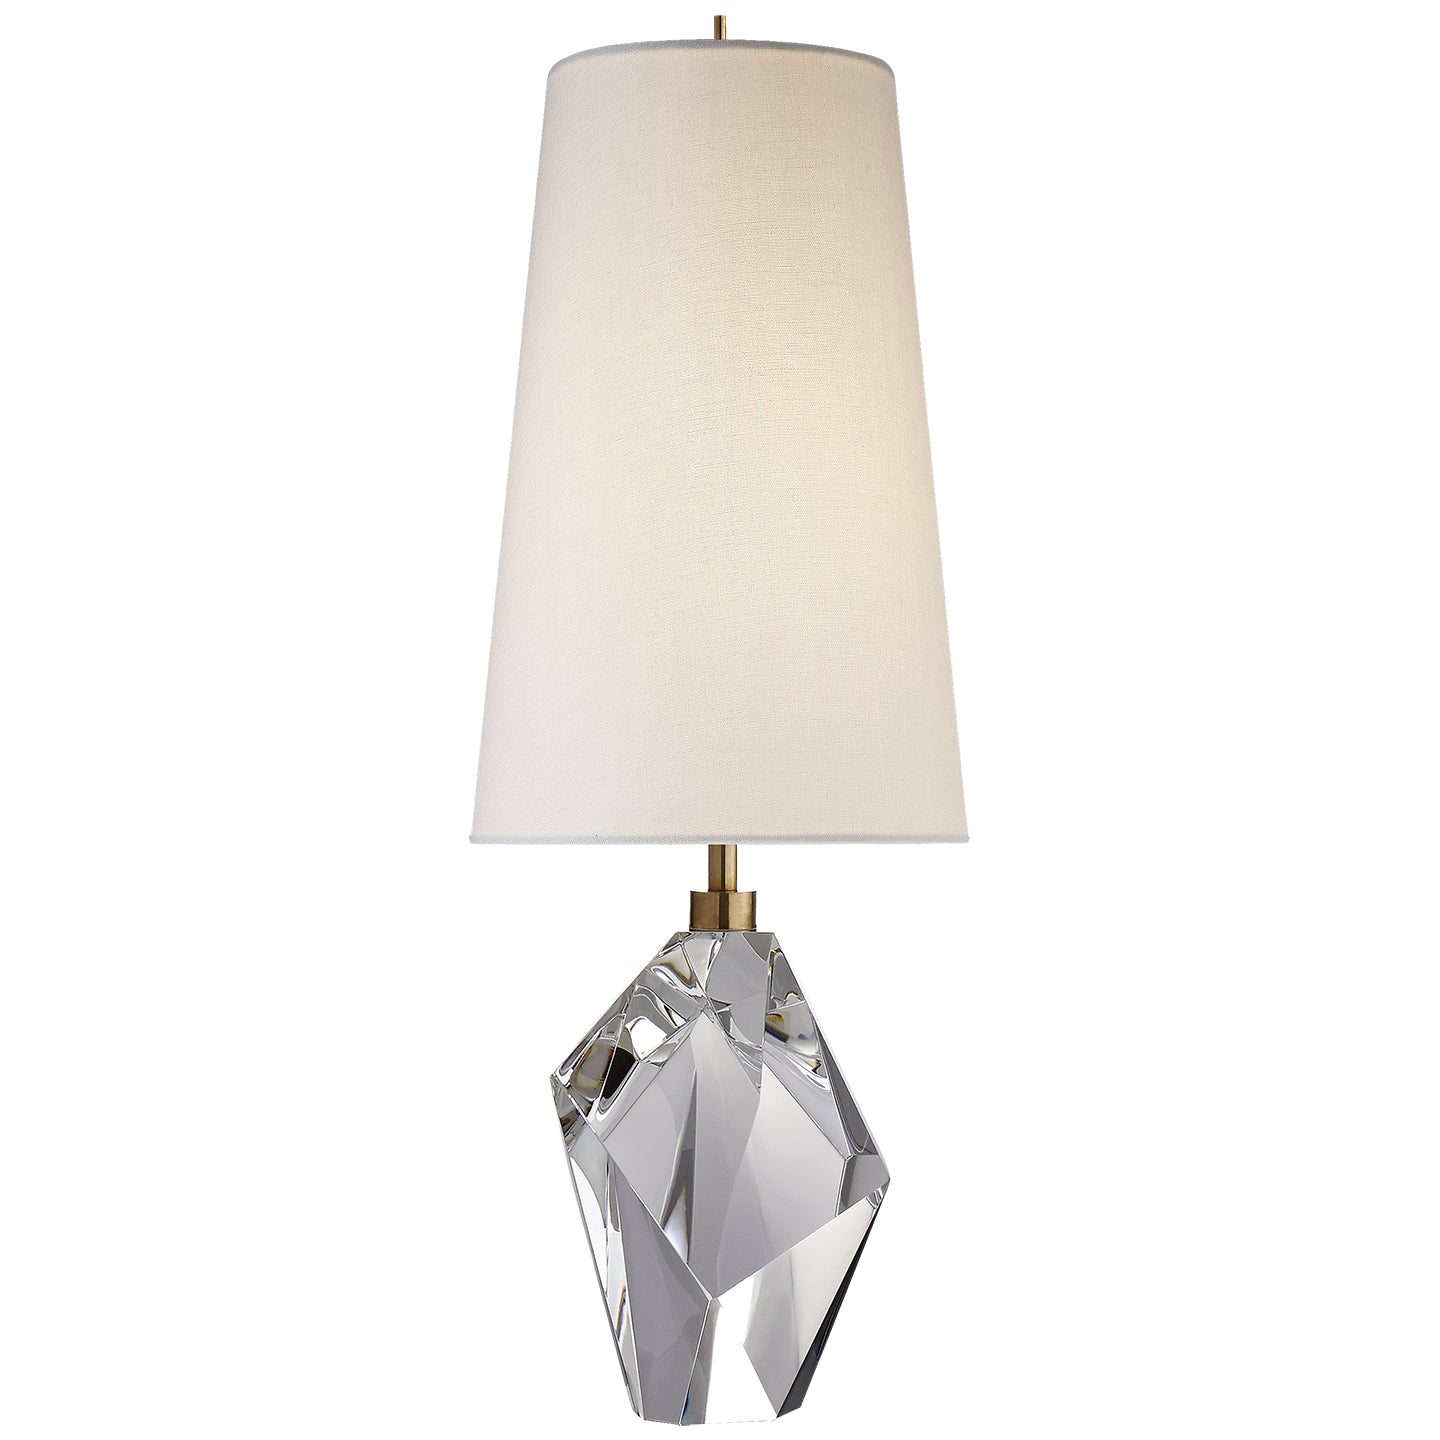 Visual Comfort Signature - KW 3012CG-L - One Light Table Lamp - Halcyon - Crystal